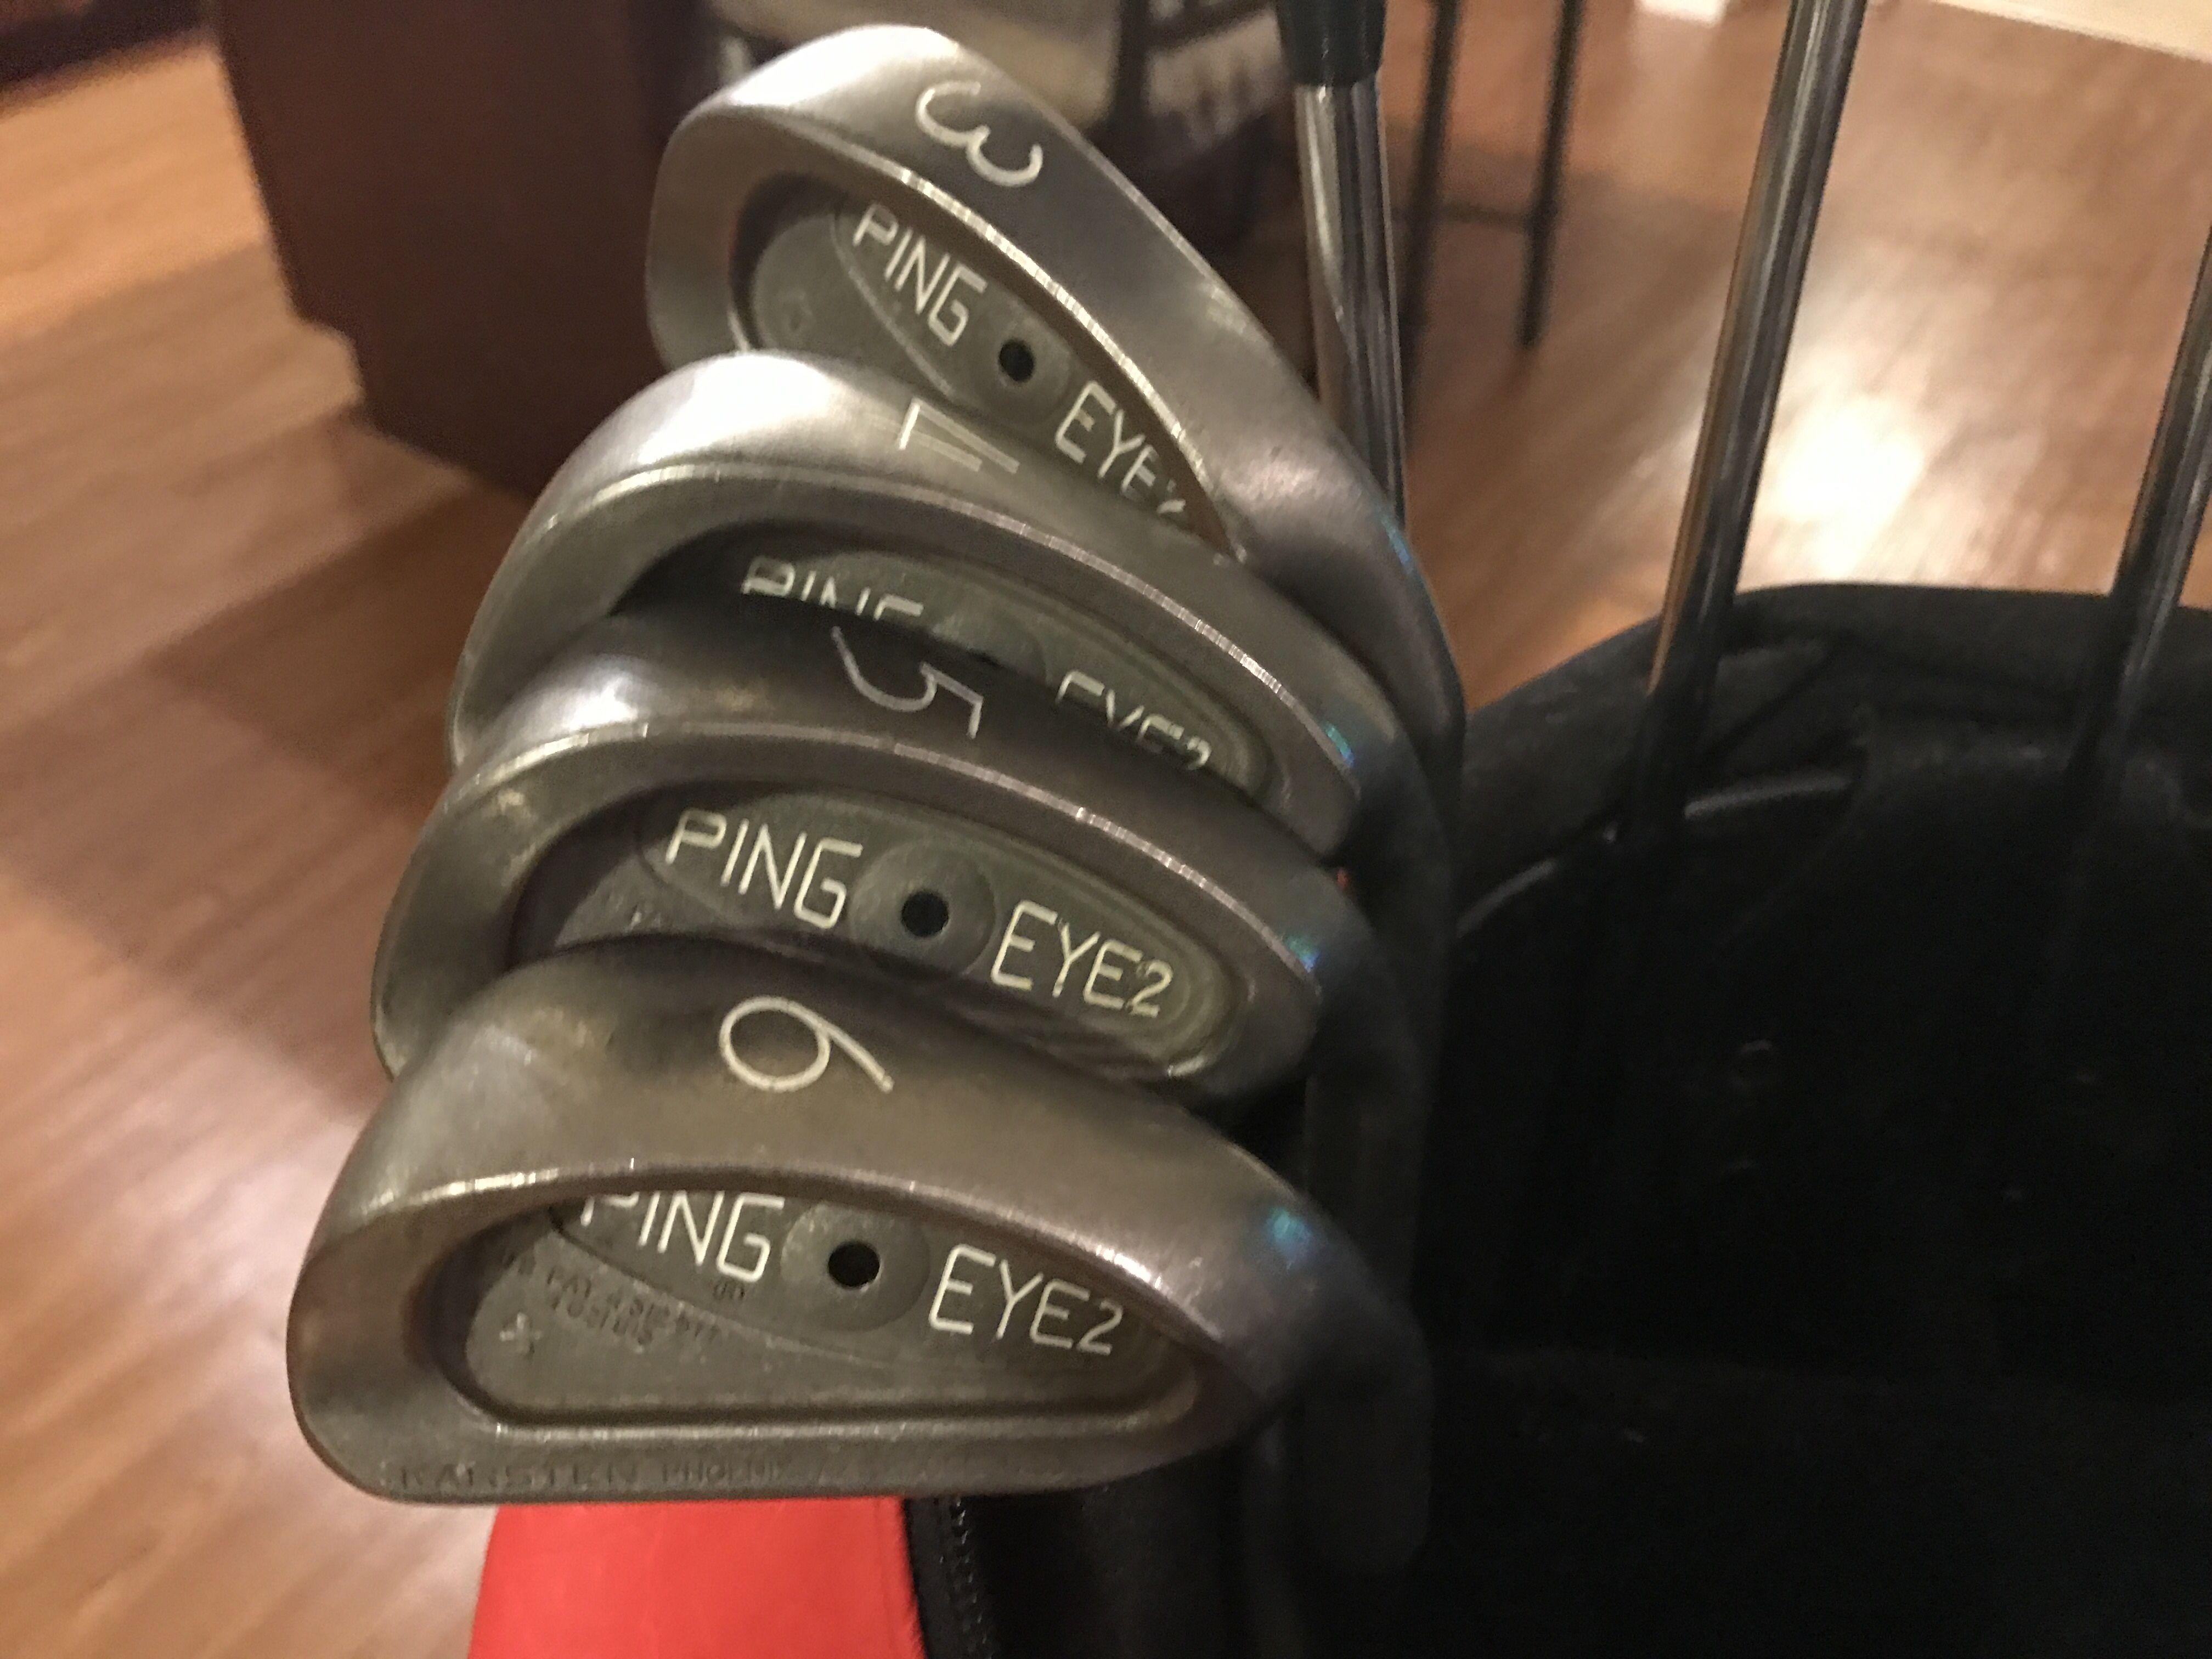 Old Ping Golf Logo - My Vintage Ping Set! Love them! - What's In Your Bag? - MyGolfSpy Forum